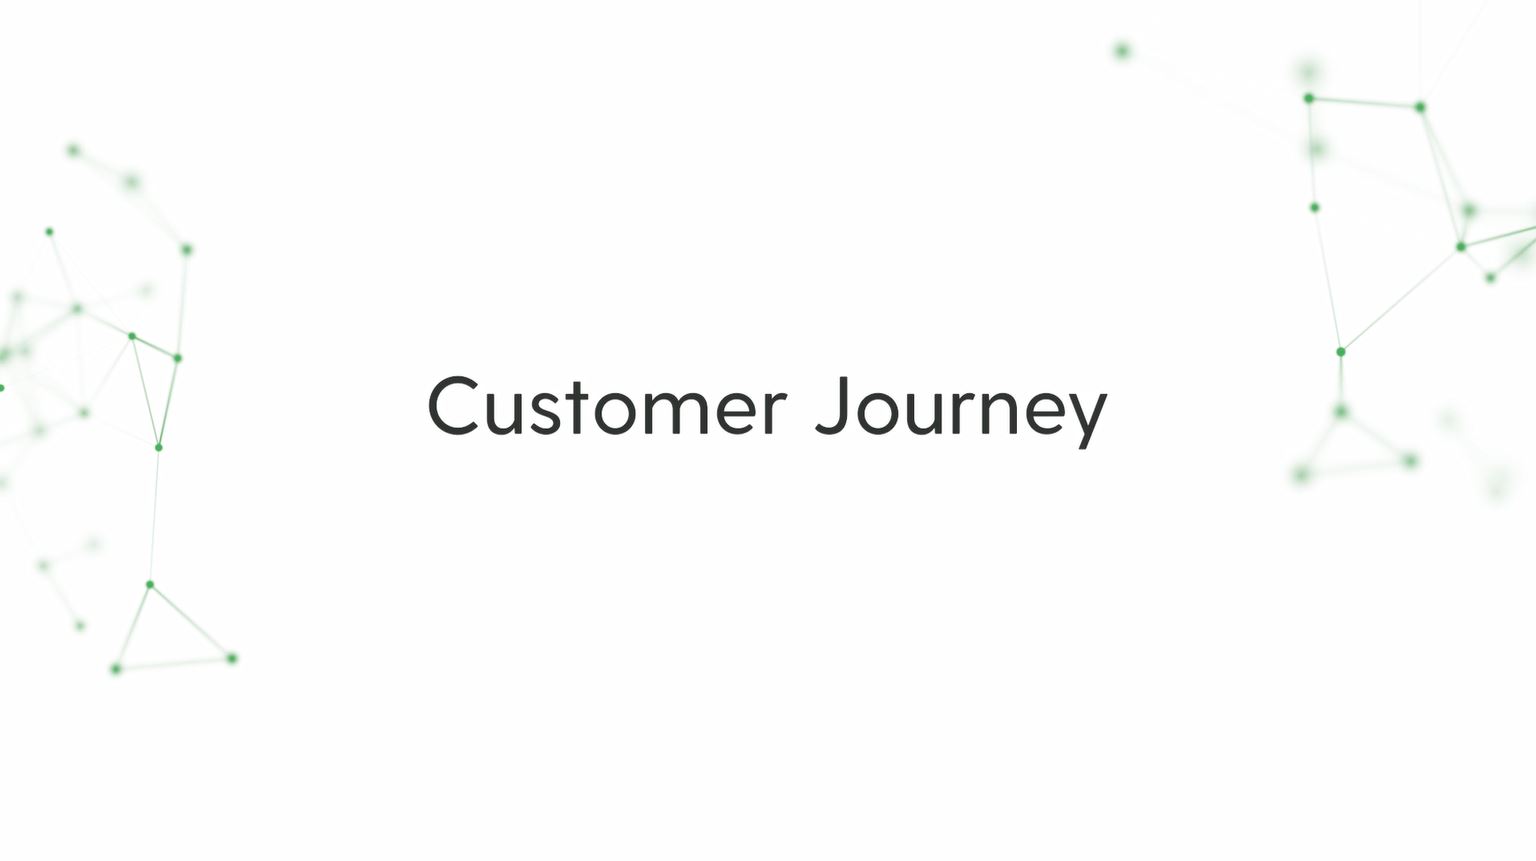 Your eMobility Customer Journey